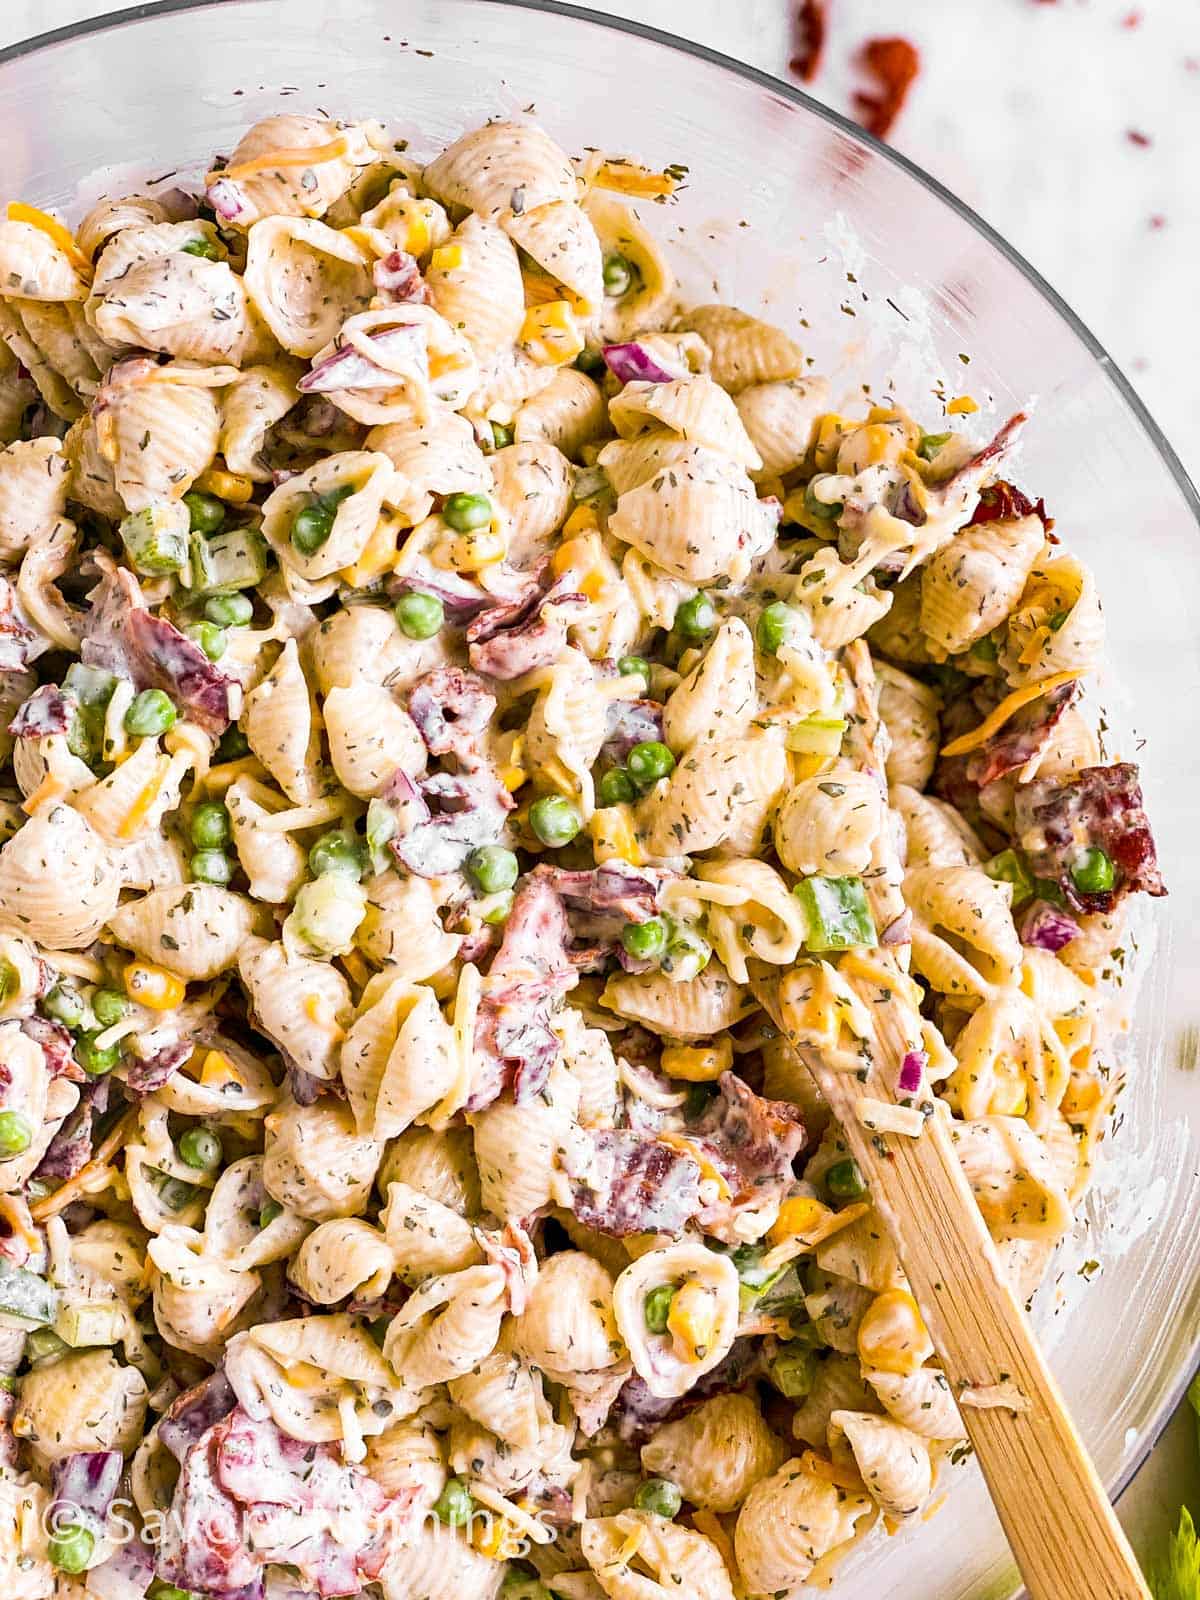 https://www.savorynothings.com/wp-content/uploads/2021/06/bacon-ranch-pasta-salad-image-3.jpg